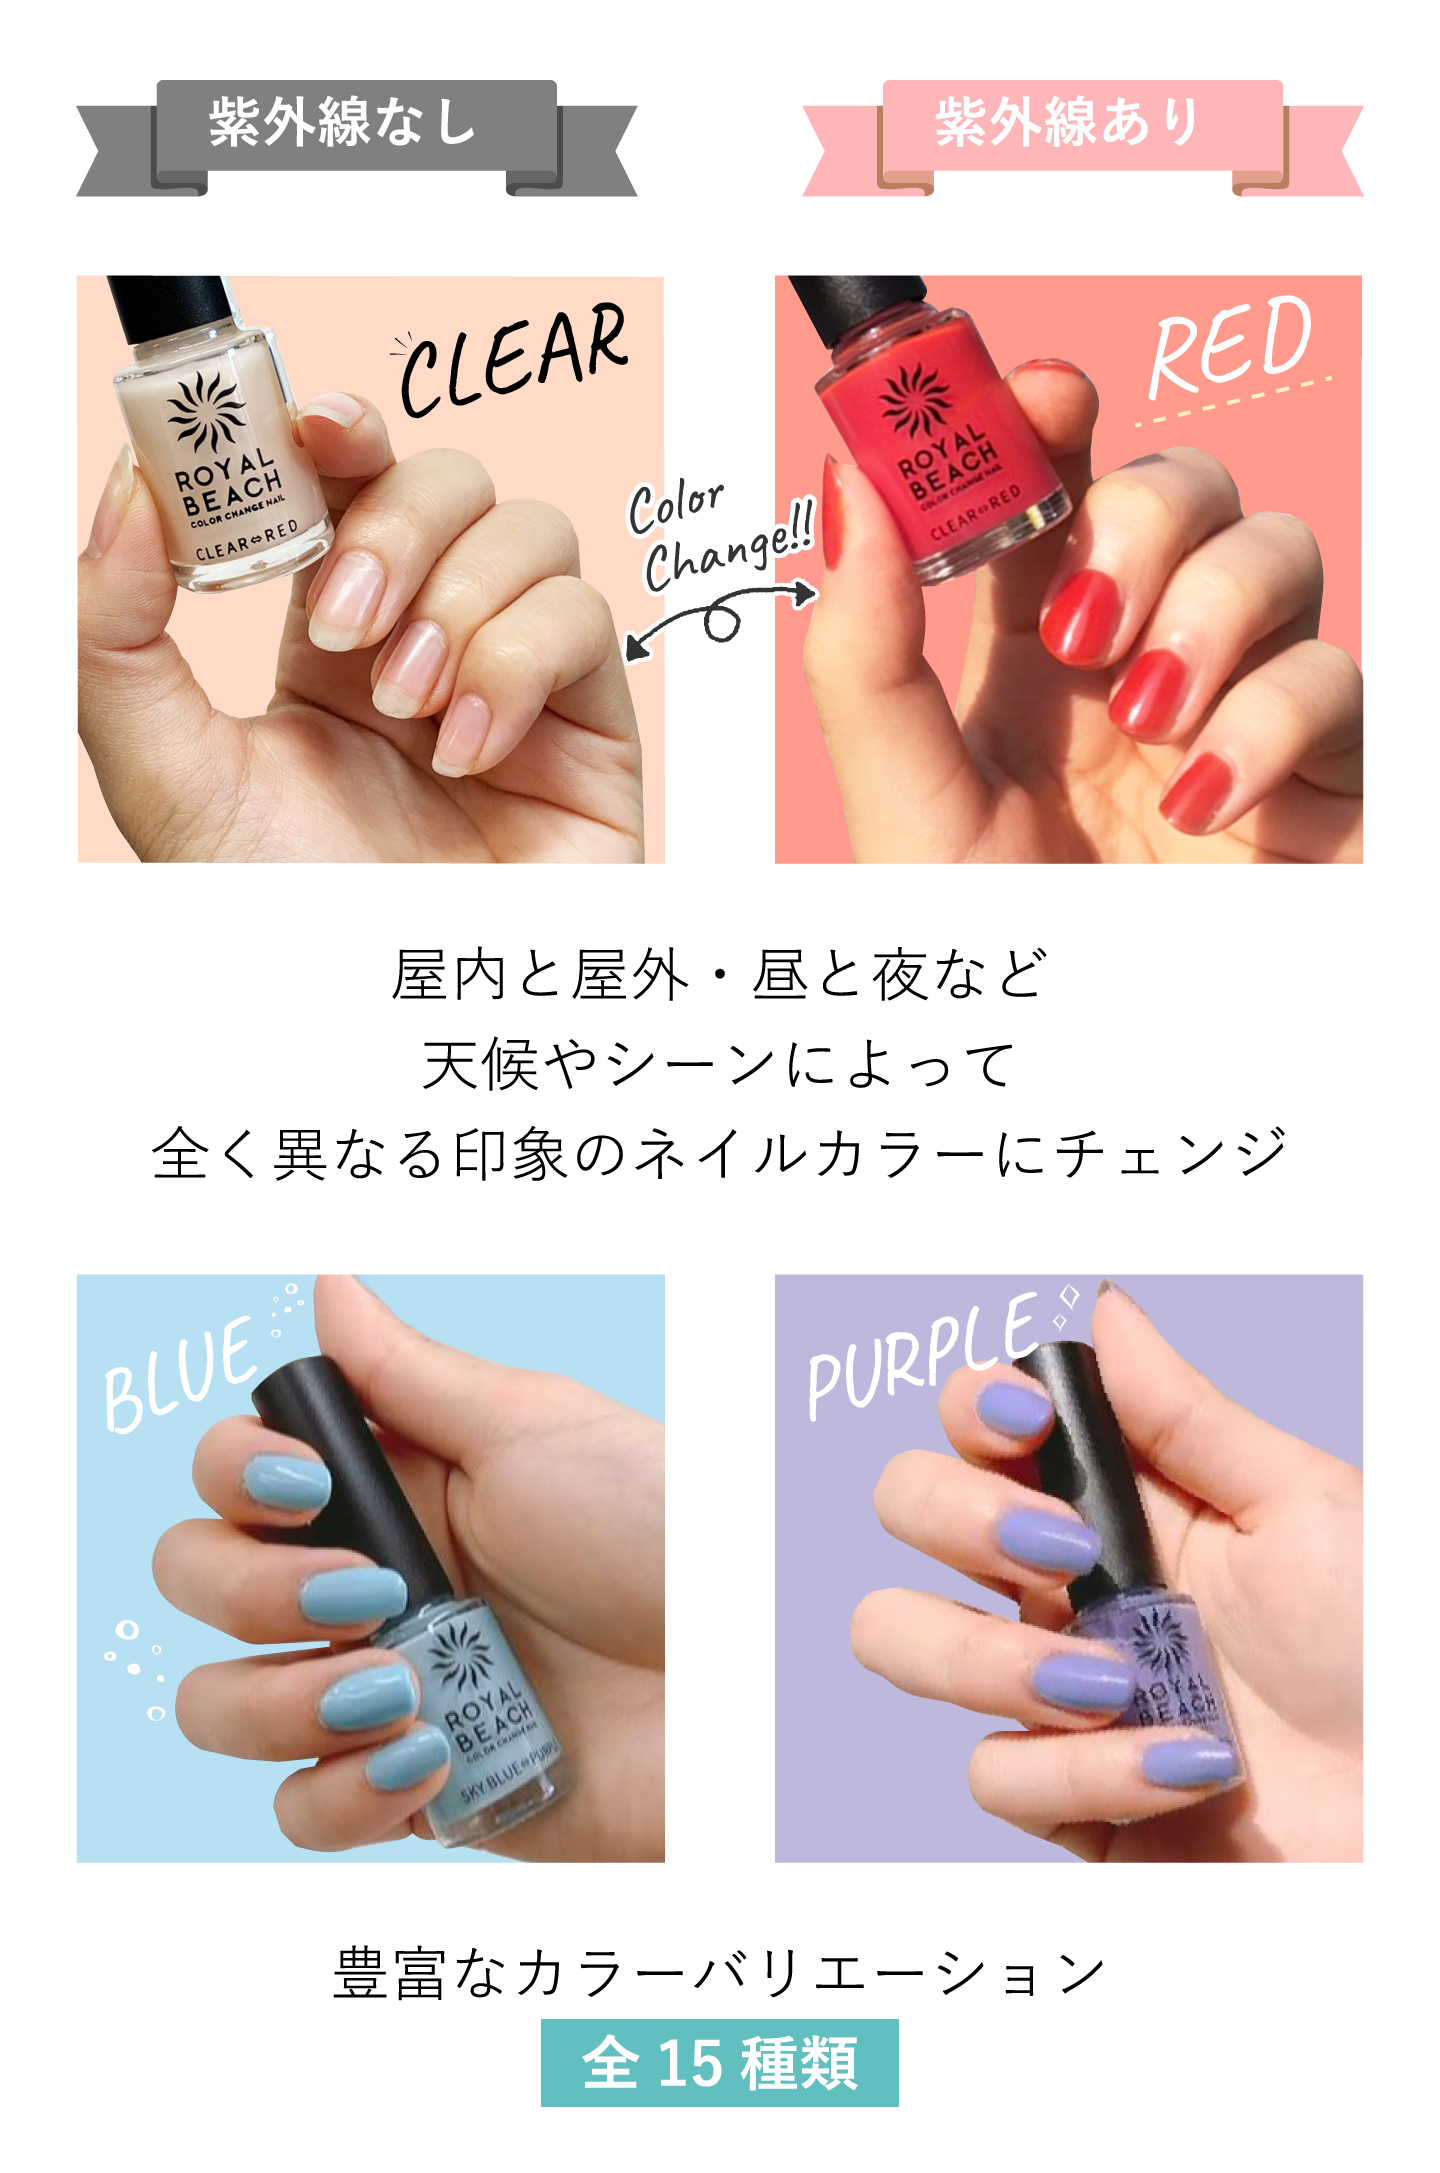 【ROYAL BEACH】<br> カラーチェンジネイル <br> 01. CLEAR⇔RED